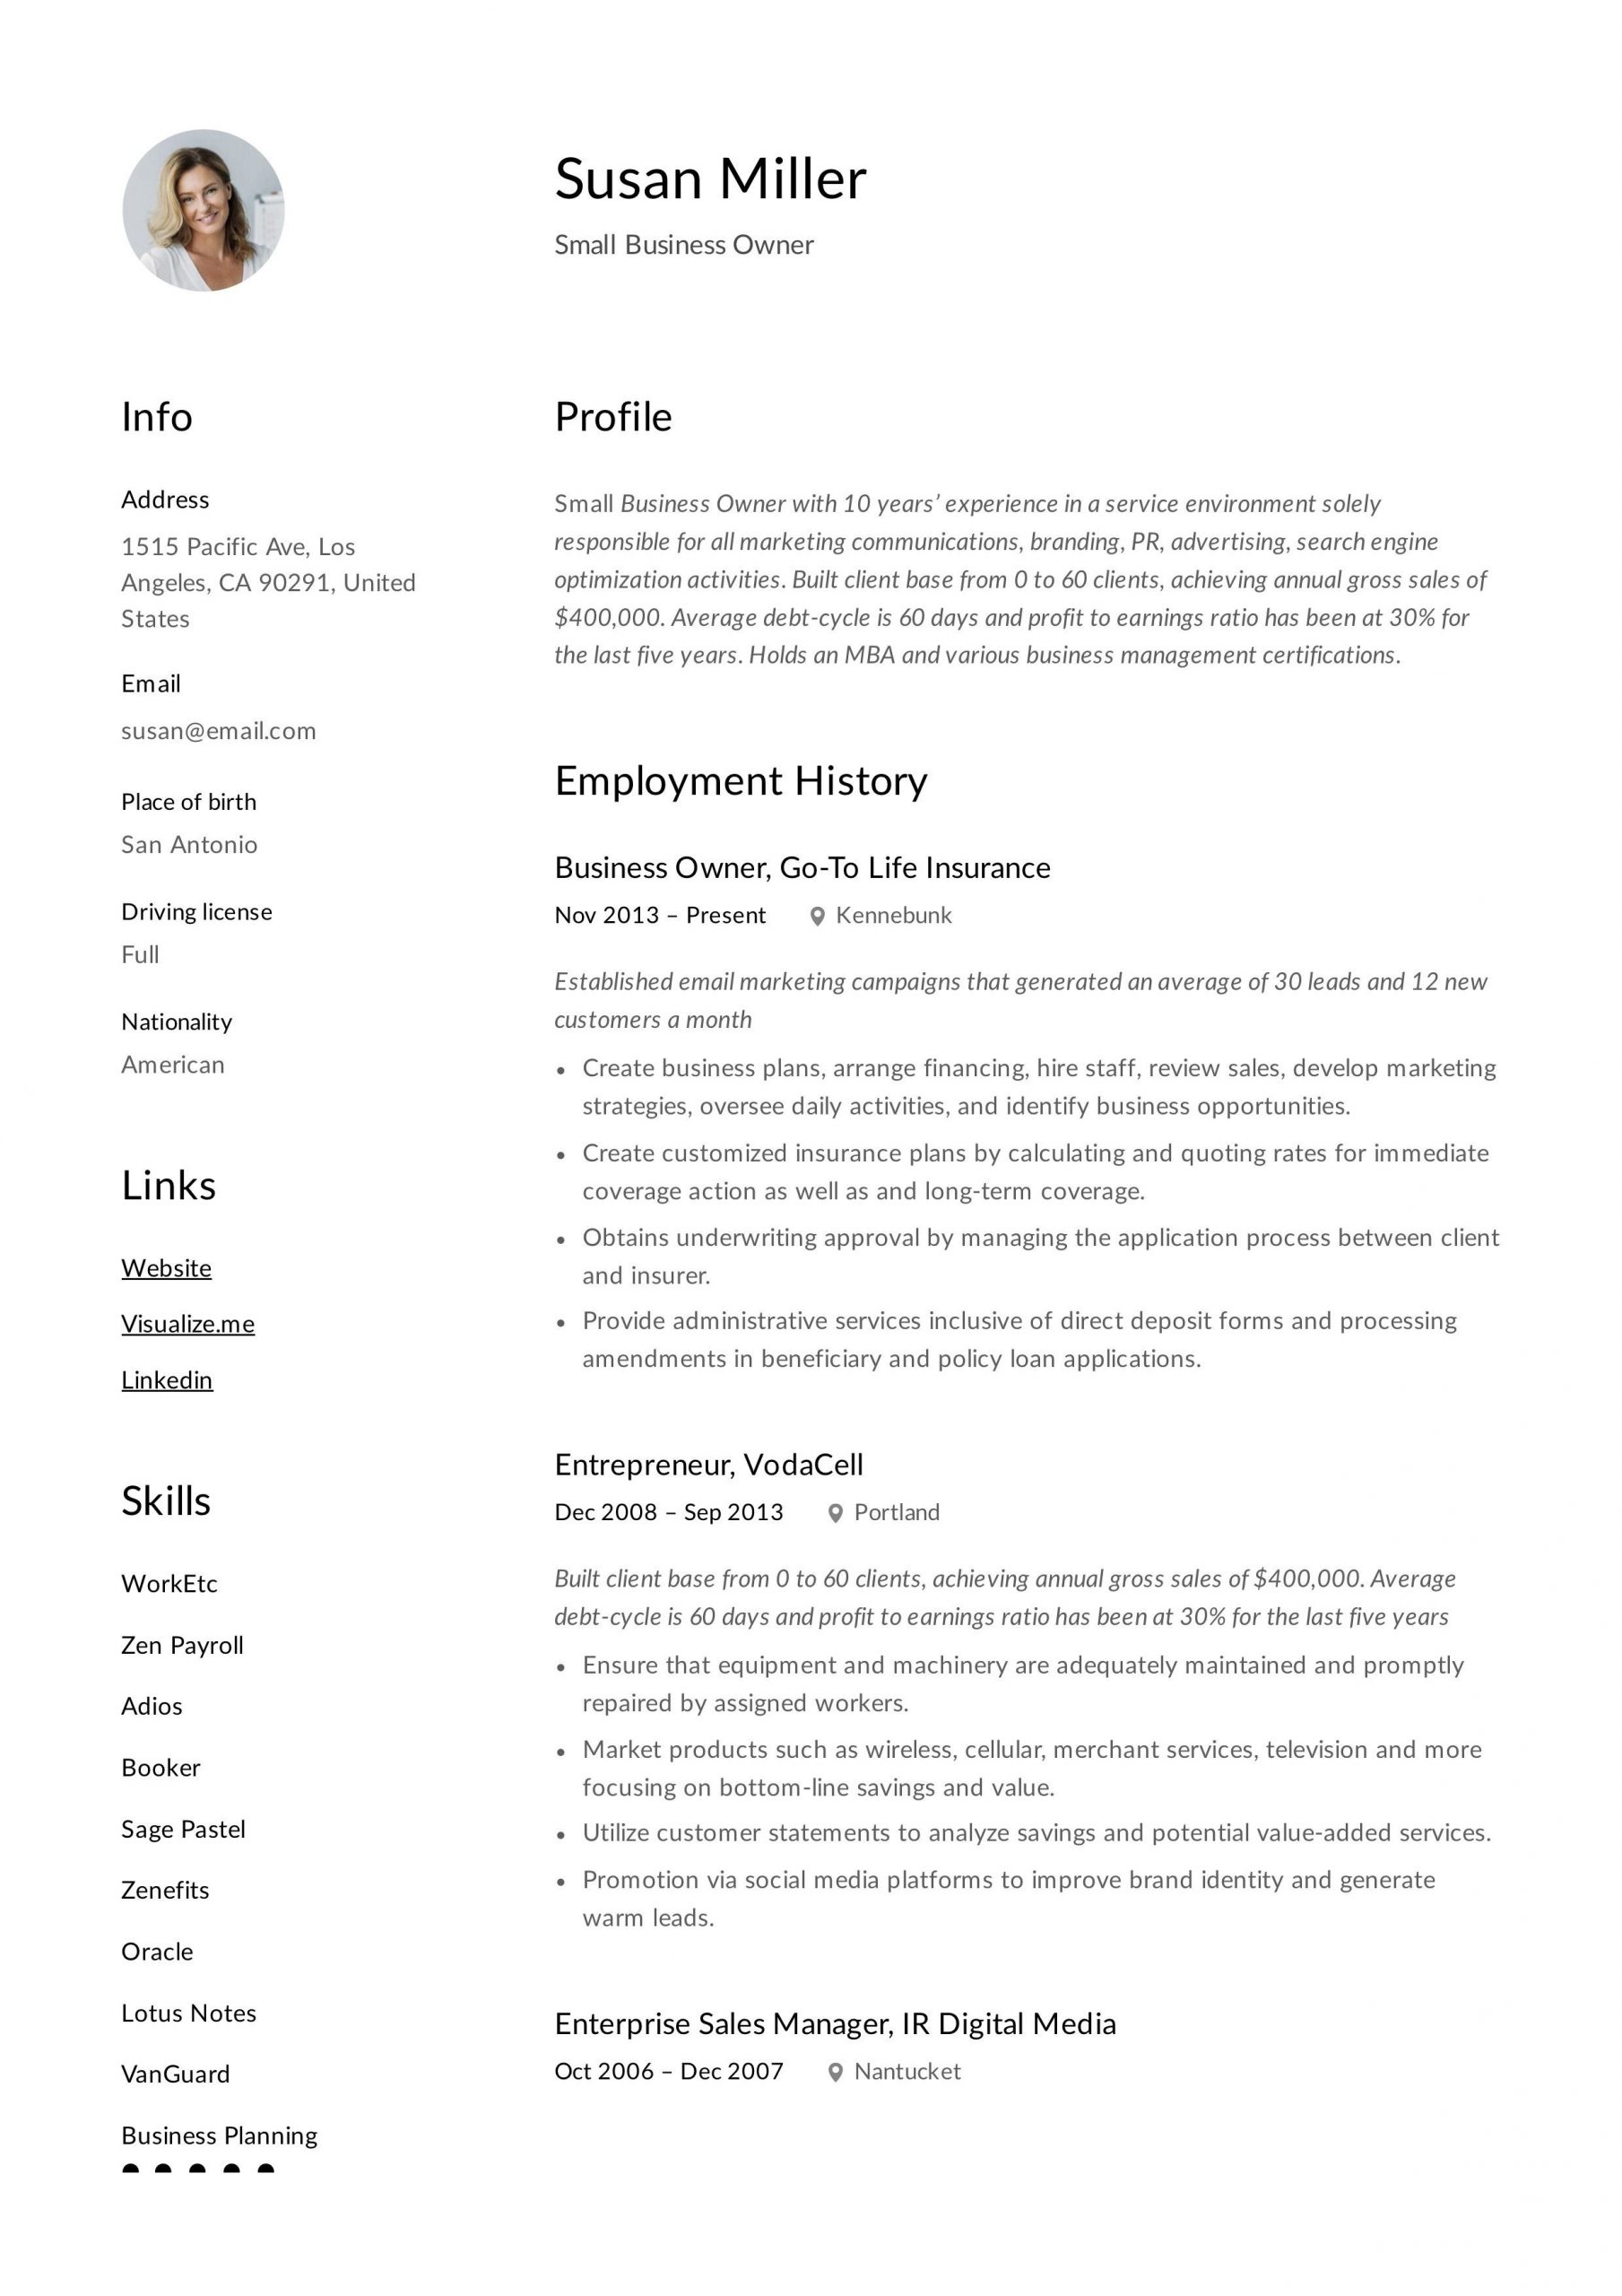 Sample Resume for Self Employed Business Owner 12 Small Business Owner Resume Examples Ideas Resume Examples …